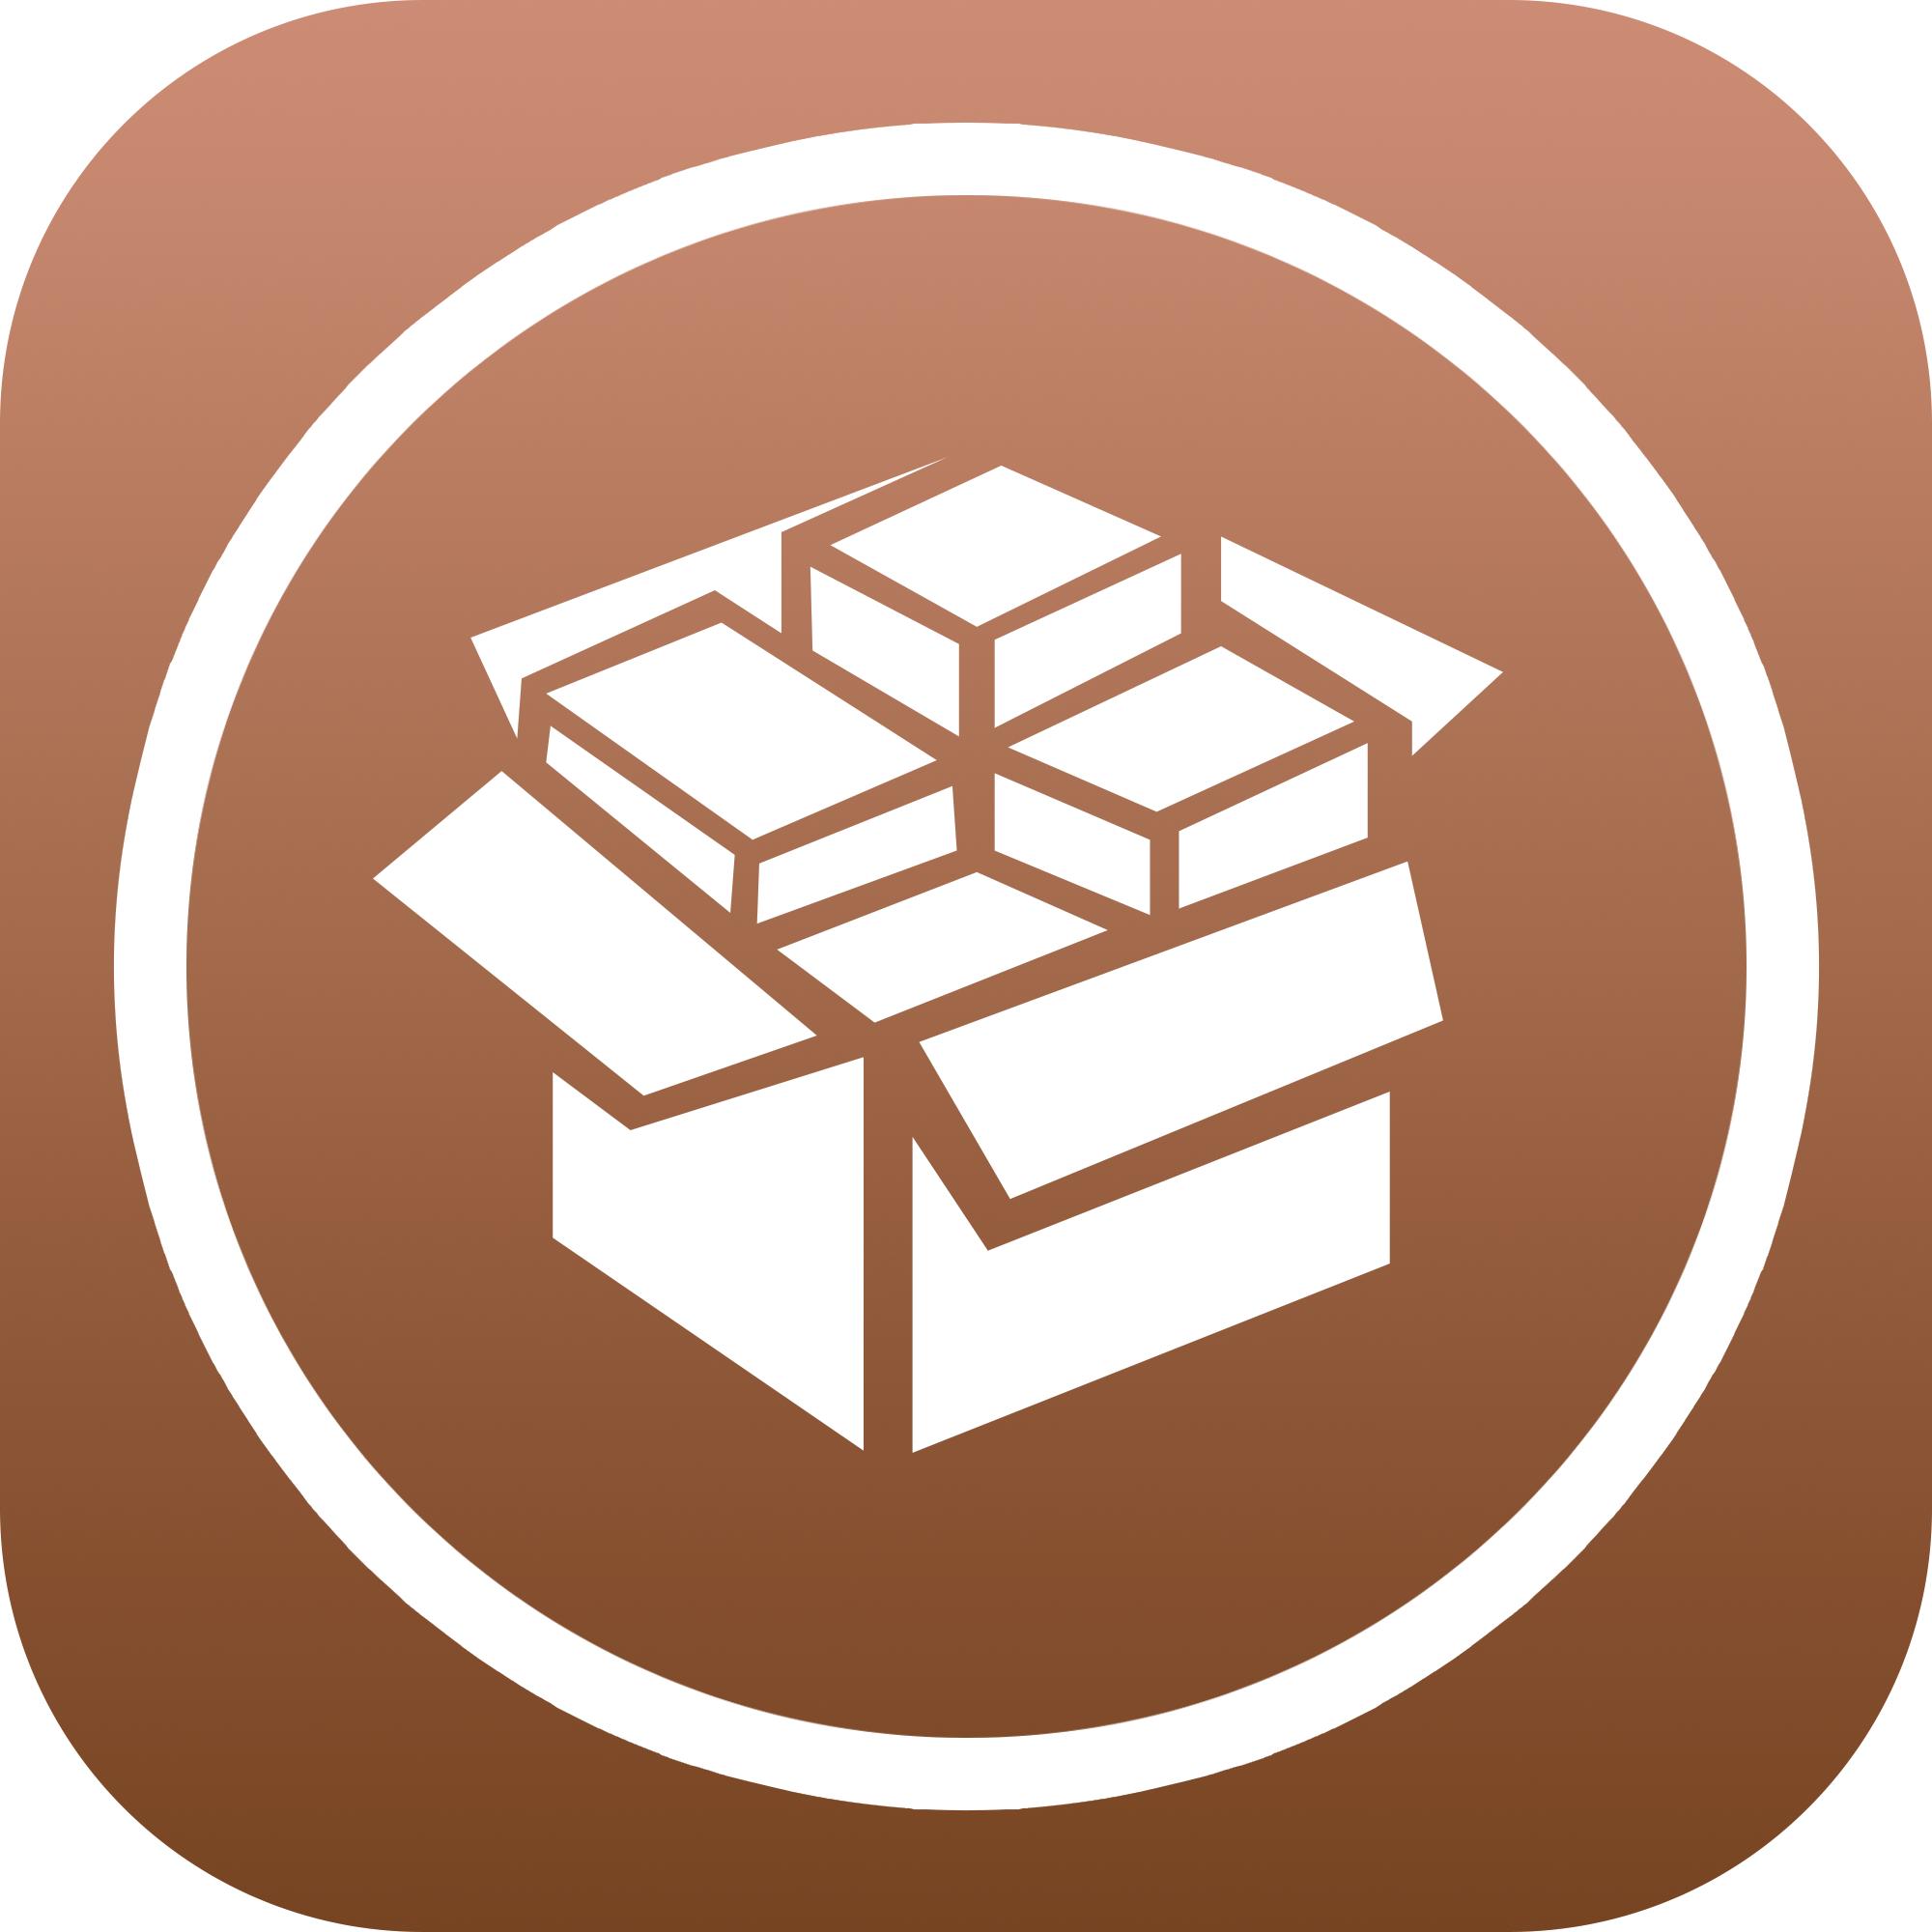 Jailbreak Logo - How to fix boot loop on a jailbroken iPhone or iPad with 'No ...